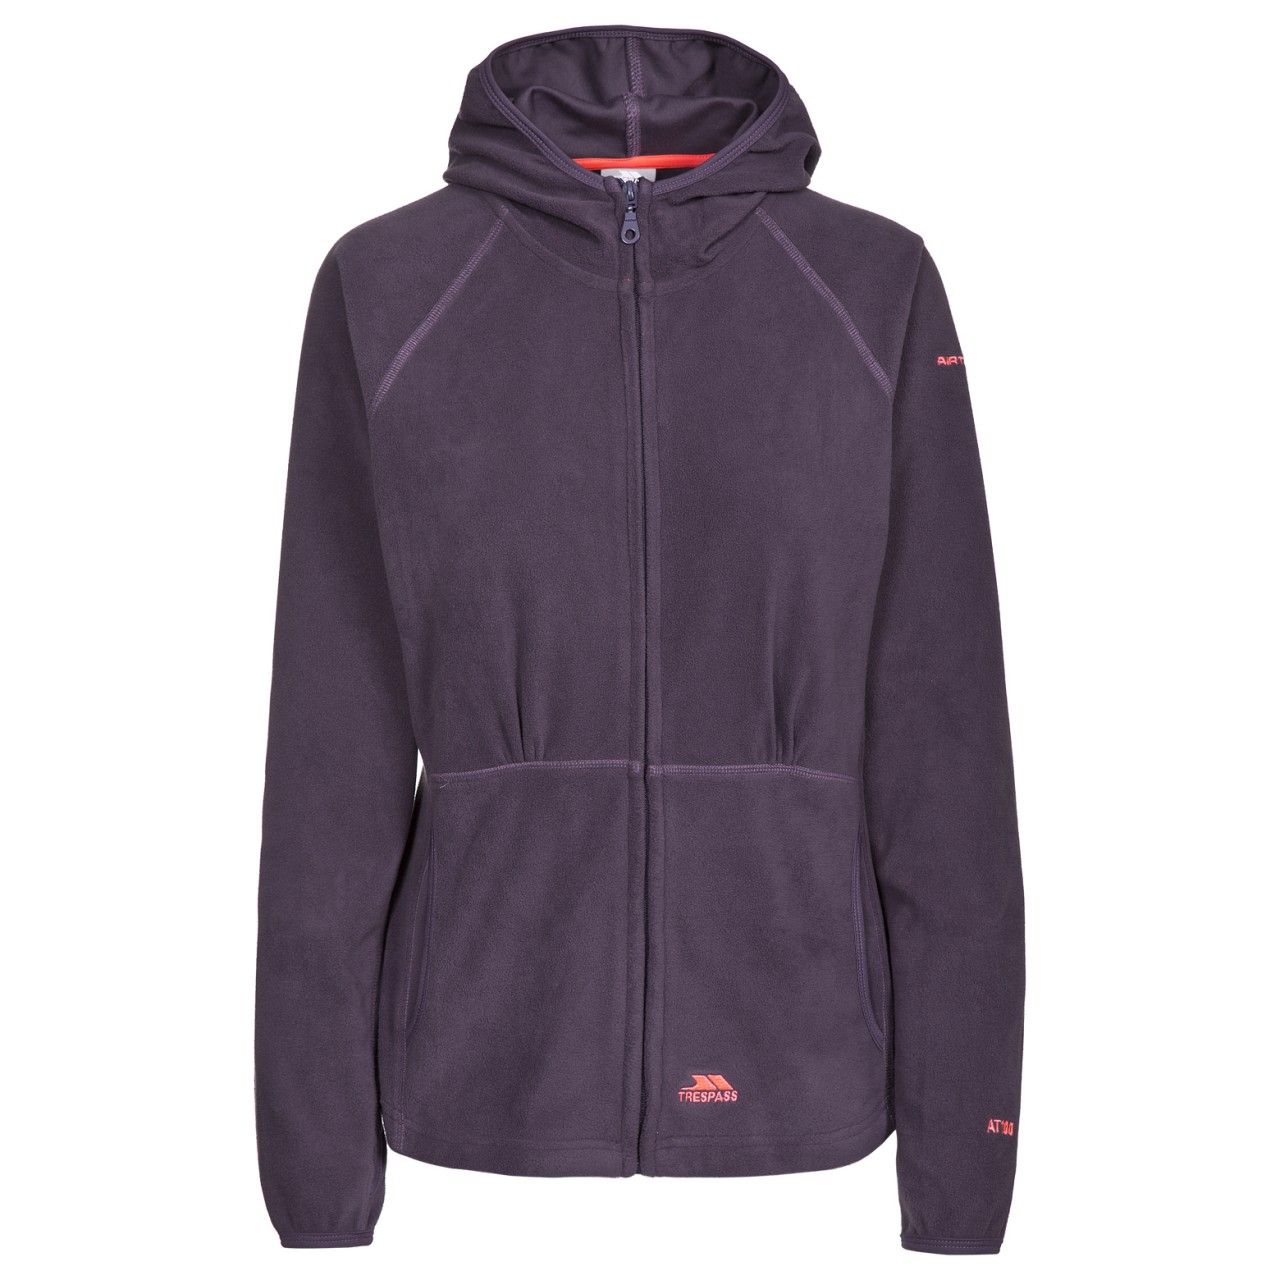 Ladies fleece jacket. 130gsm Airtrap fleece build to trap and hold onto body heat. Zip through front. Stretch binding at cuffs. 2 pockets on front. 100% Polyester. Trespass Womens Chest Sizing (approx): XS/8 - 32in/81cm, S/10 - 34in/86cm, M/12 - 36in/91.4cm, L/14 - 38in/96.5cm, XL/16 - 40in/101.5cm, XXL/18 - 42in/106.5cm.